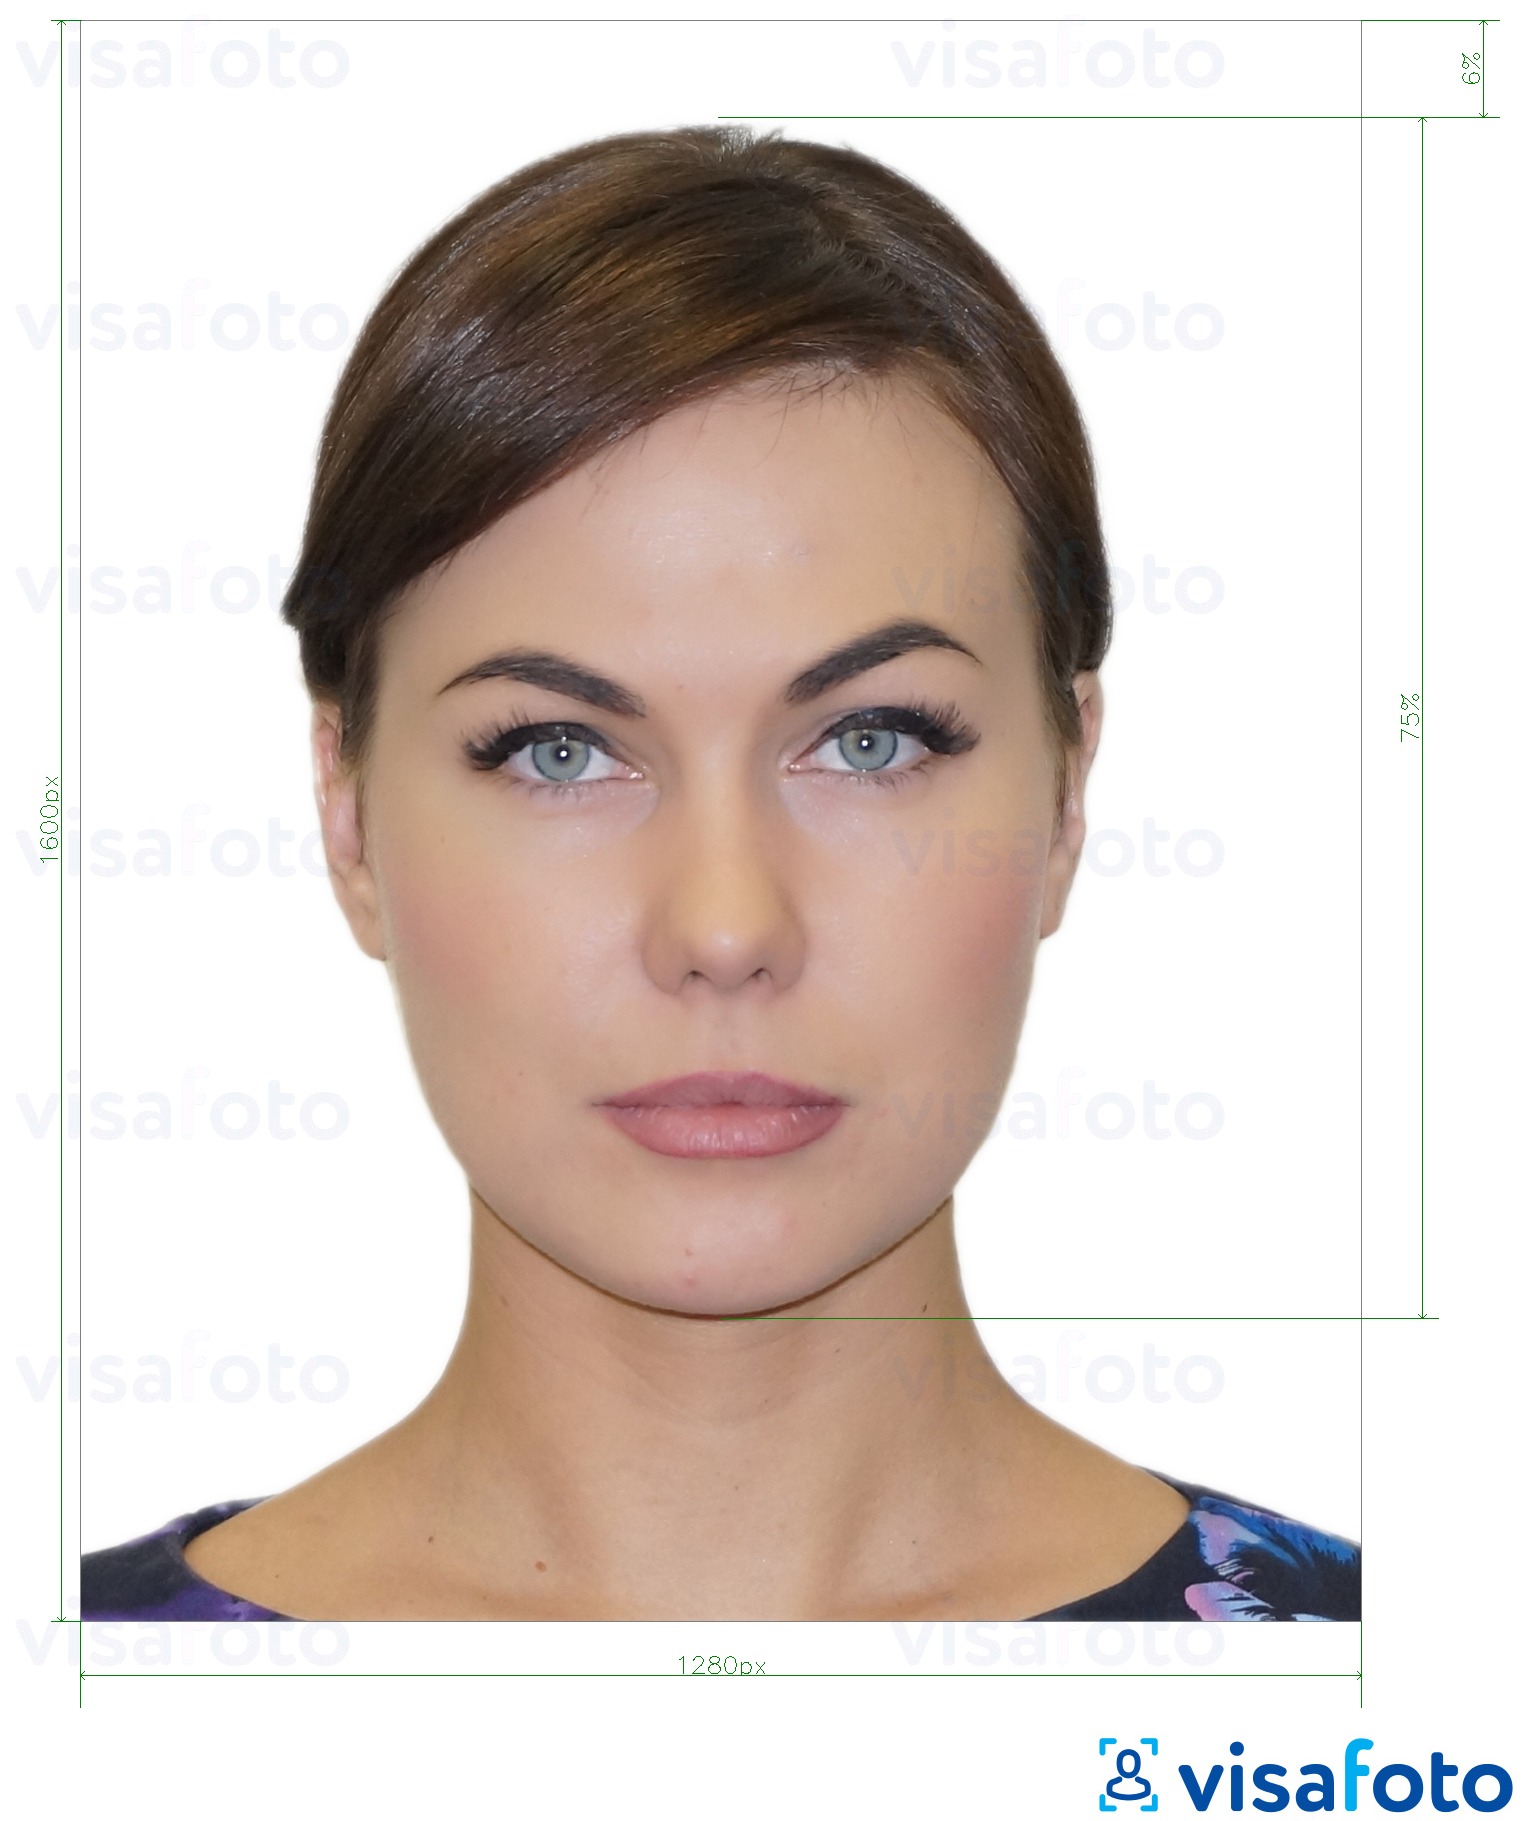 Example of photo for Greece driving license 1280x1600 pixels with exact size specification